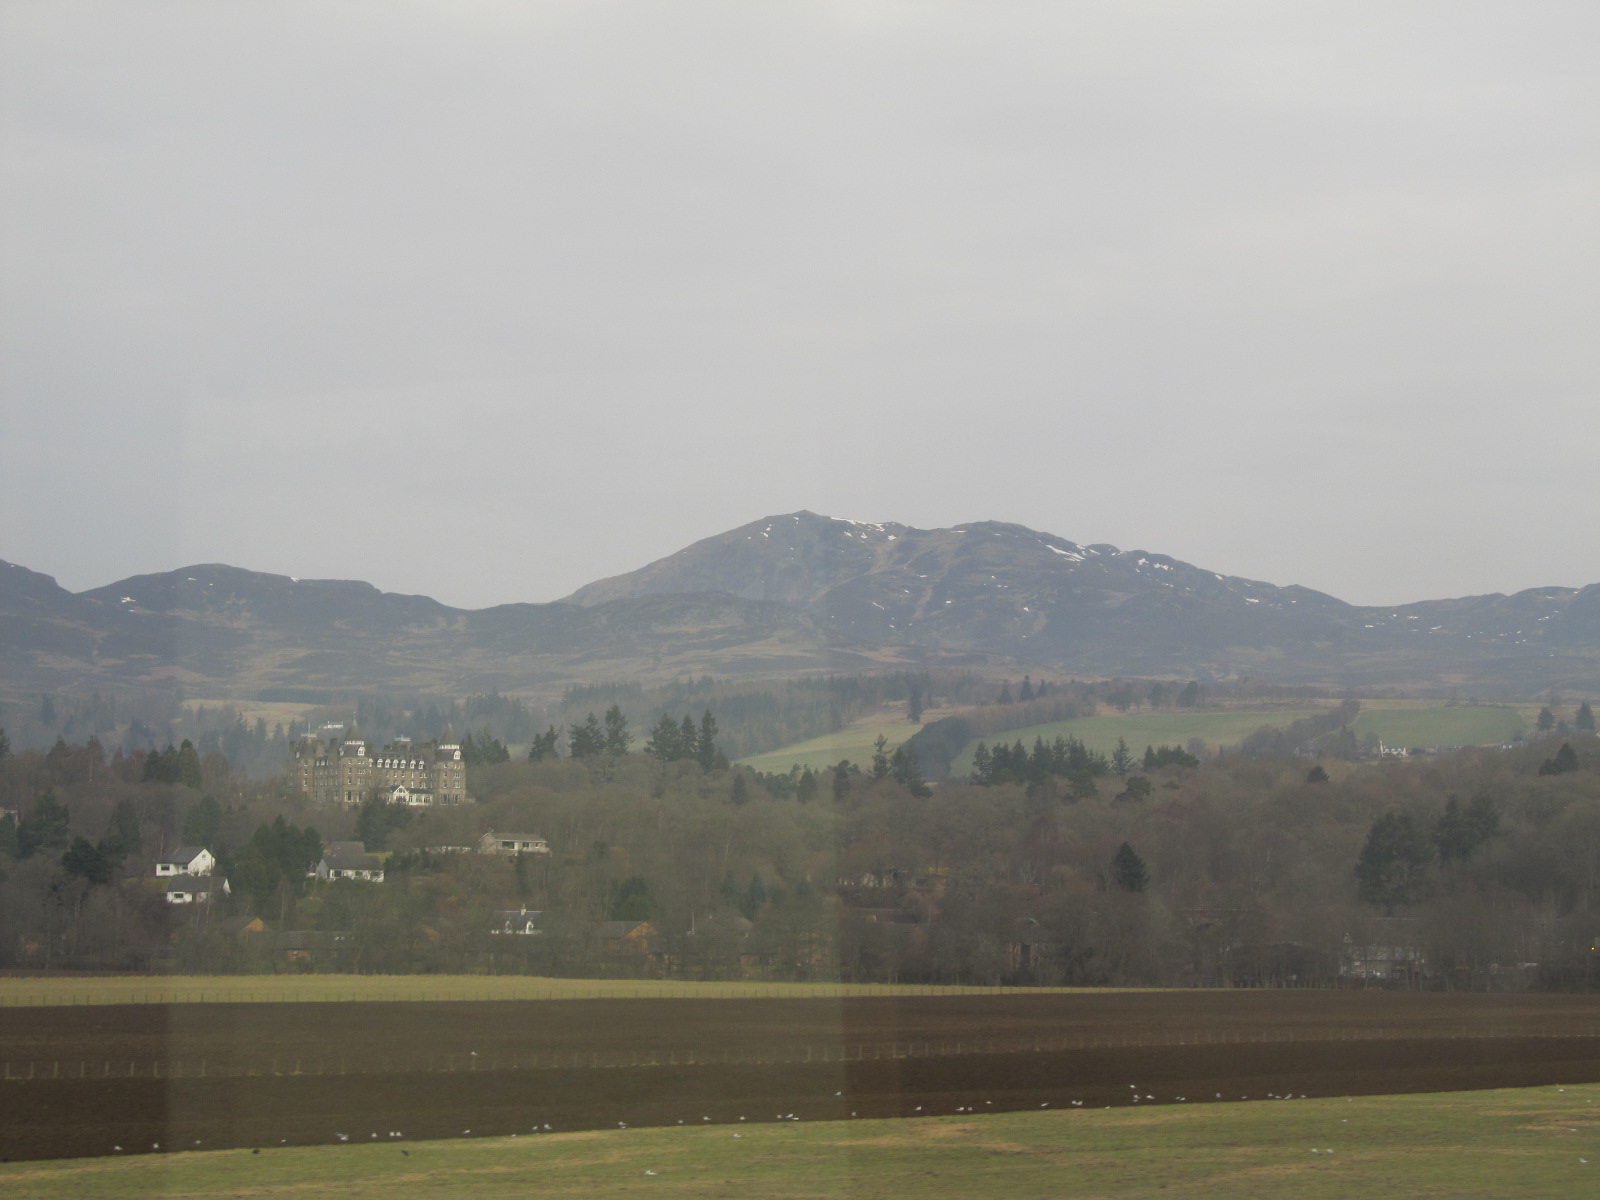 River Tay valley and view on the Creag Dhubh with Athol Palace Hotel